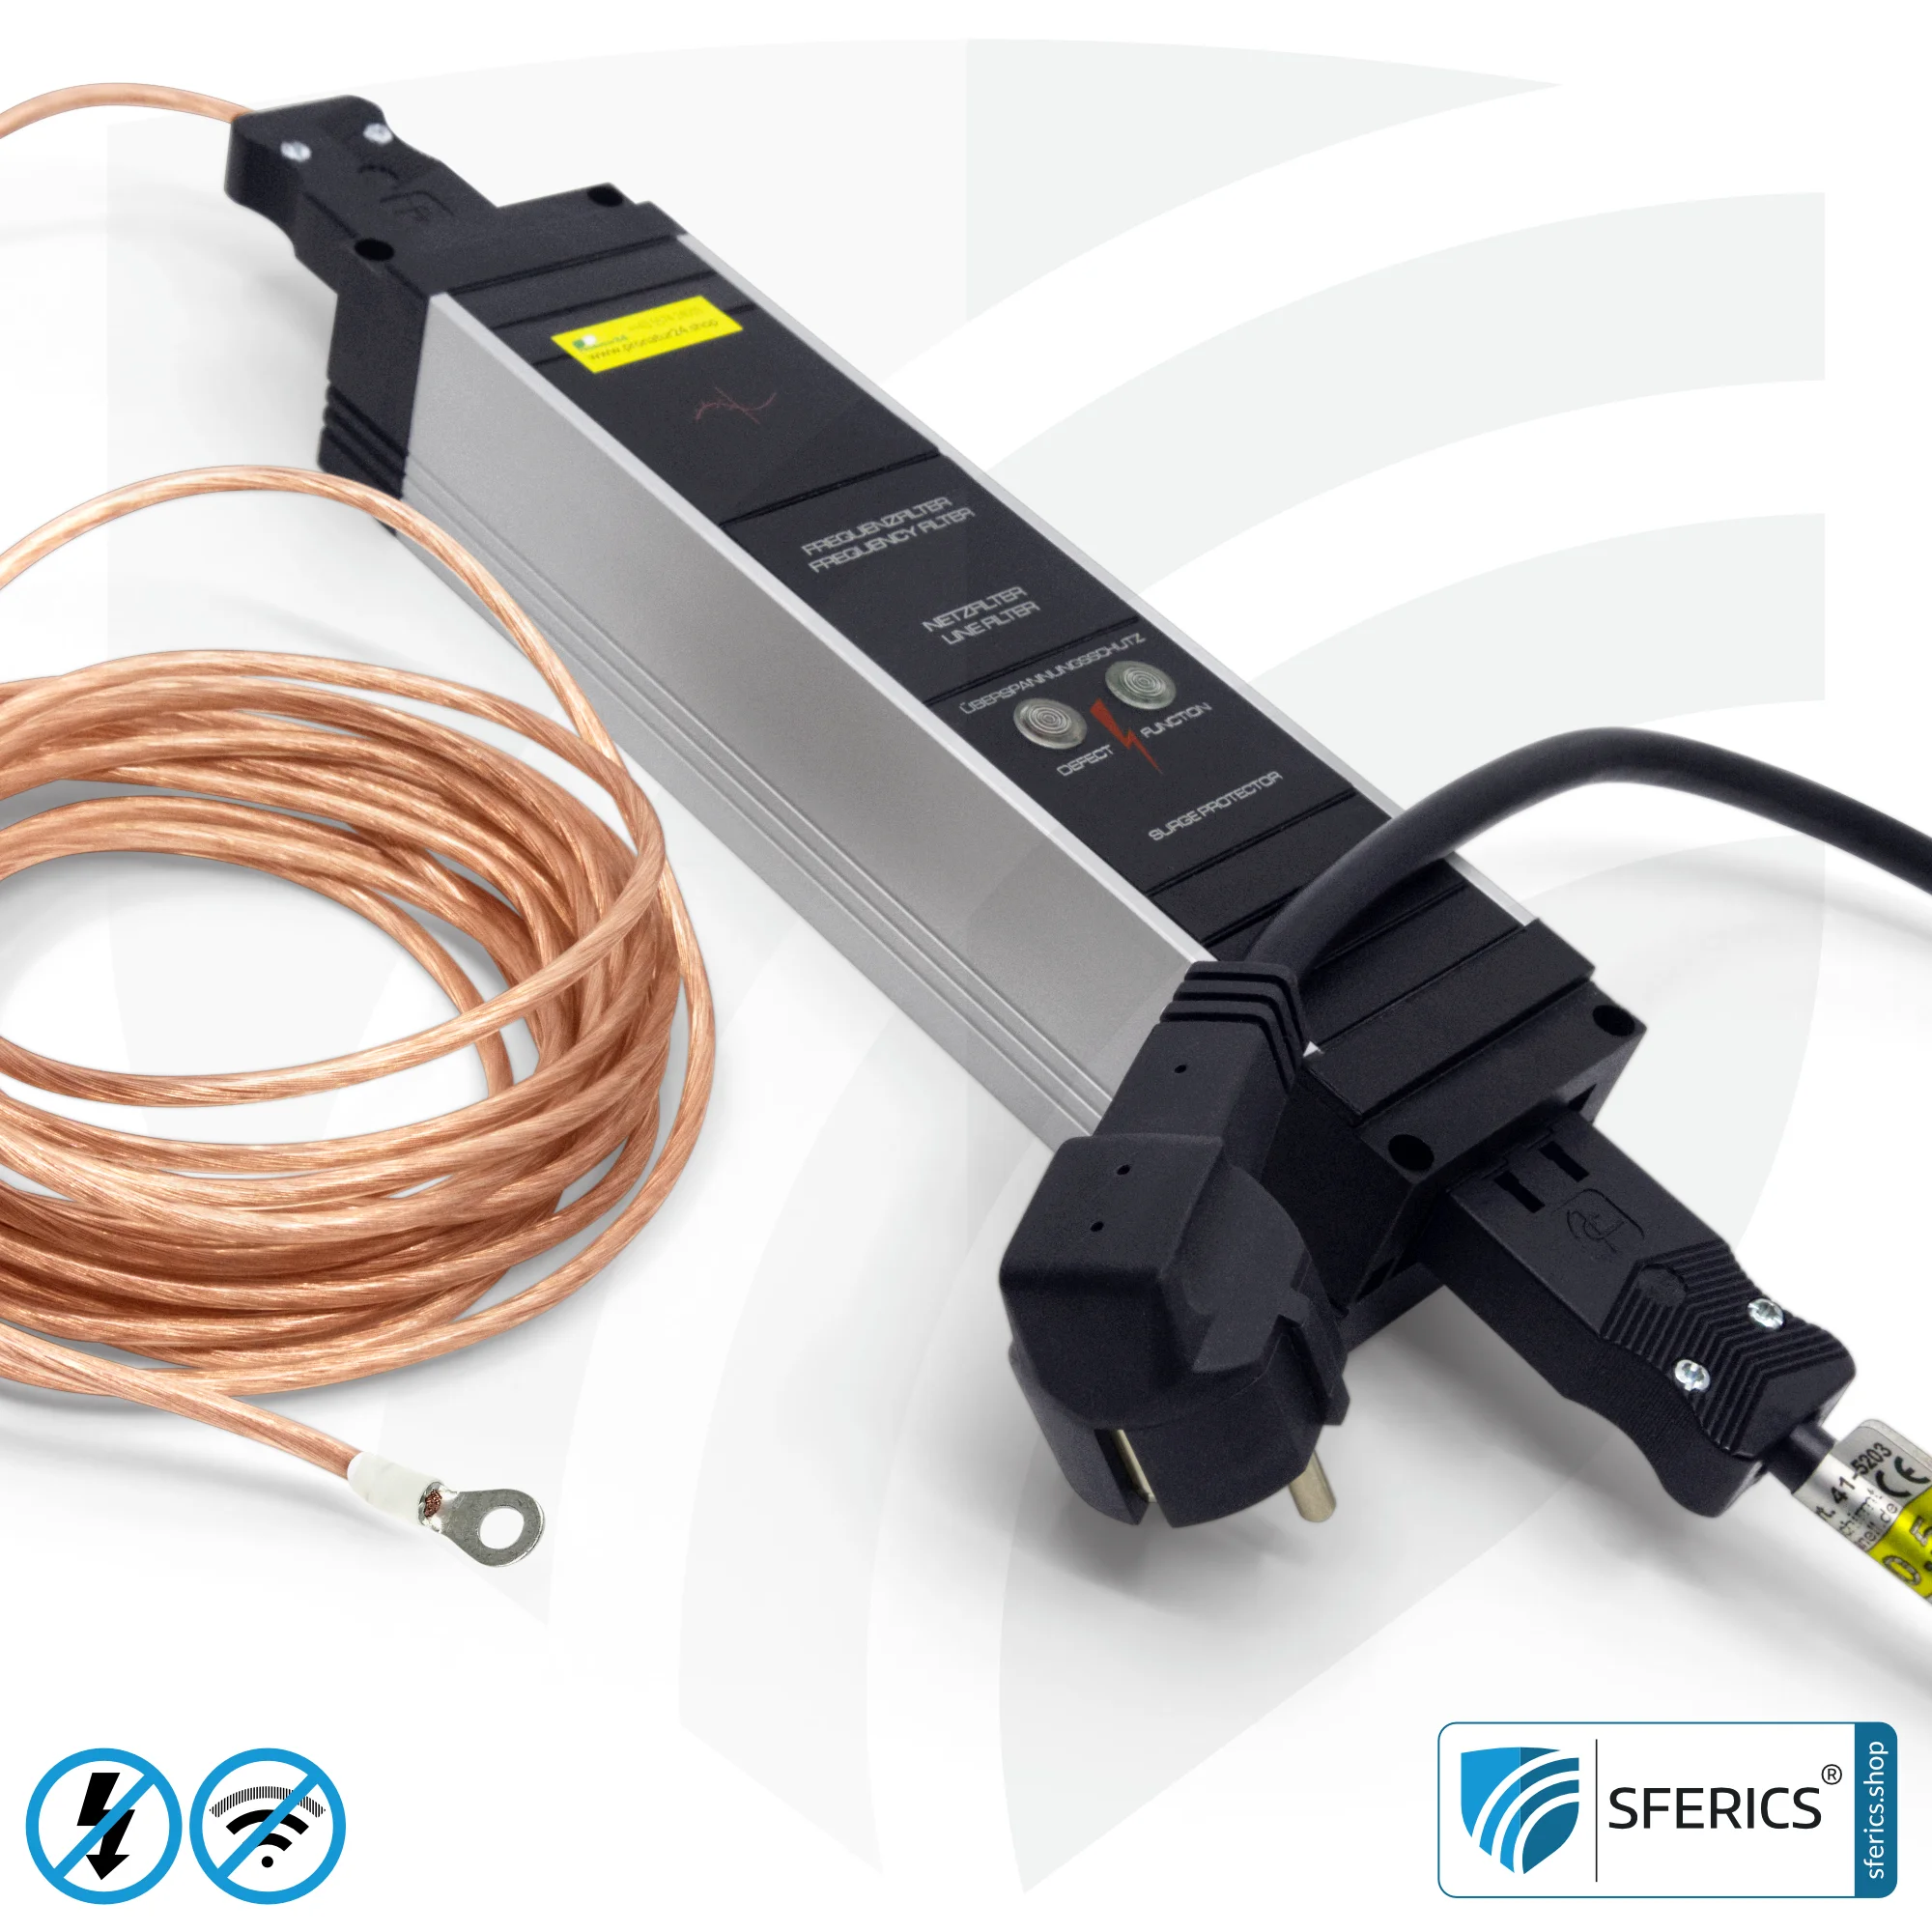 Powerline filter for groundable canopy, tent and sleeping bag | shielding range from 2 to 68 MHz | attenuation of Powerline (PLC / DLAN) frequencies from the grounding cable. Feedimage.